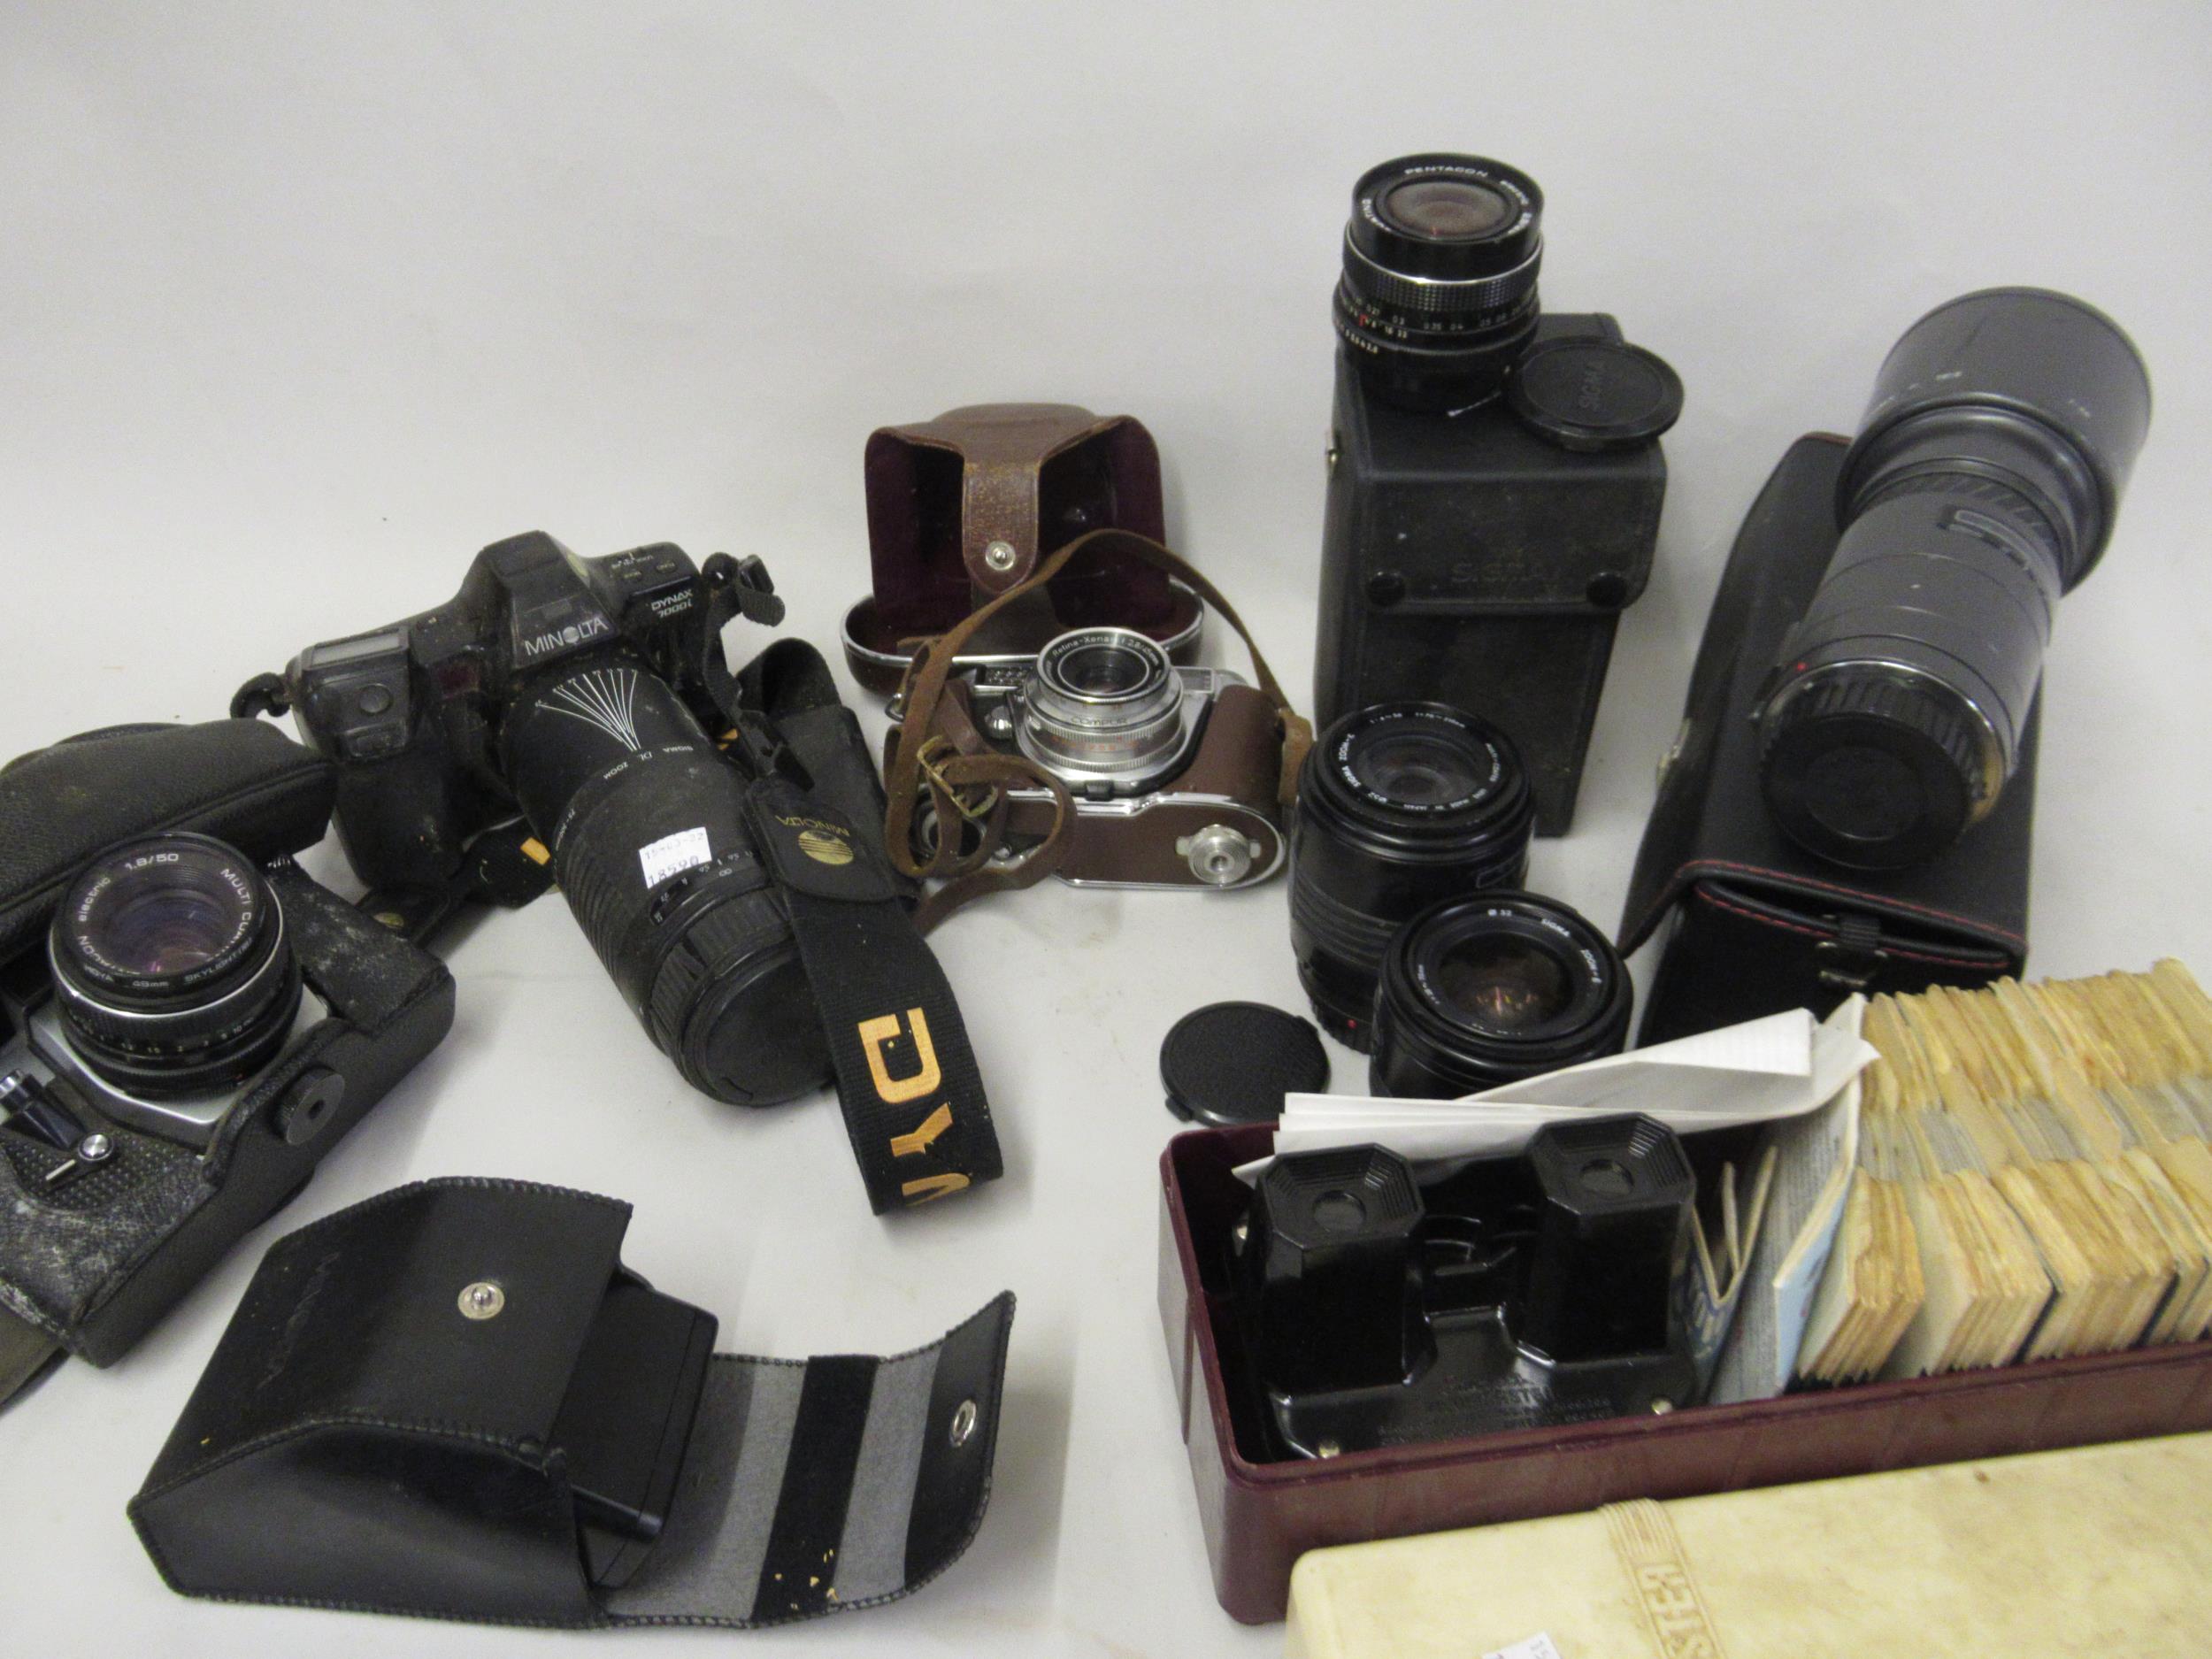 Quantity of miscellaneous cameras and lenses, together with a Viewmaster stereo viewer with cards